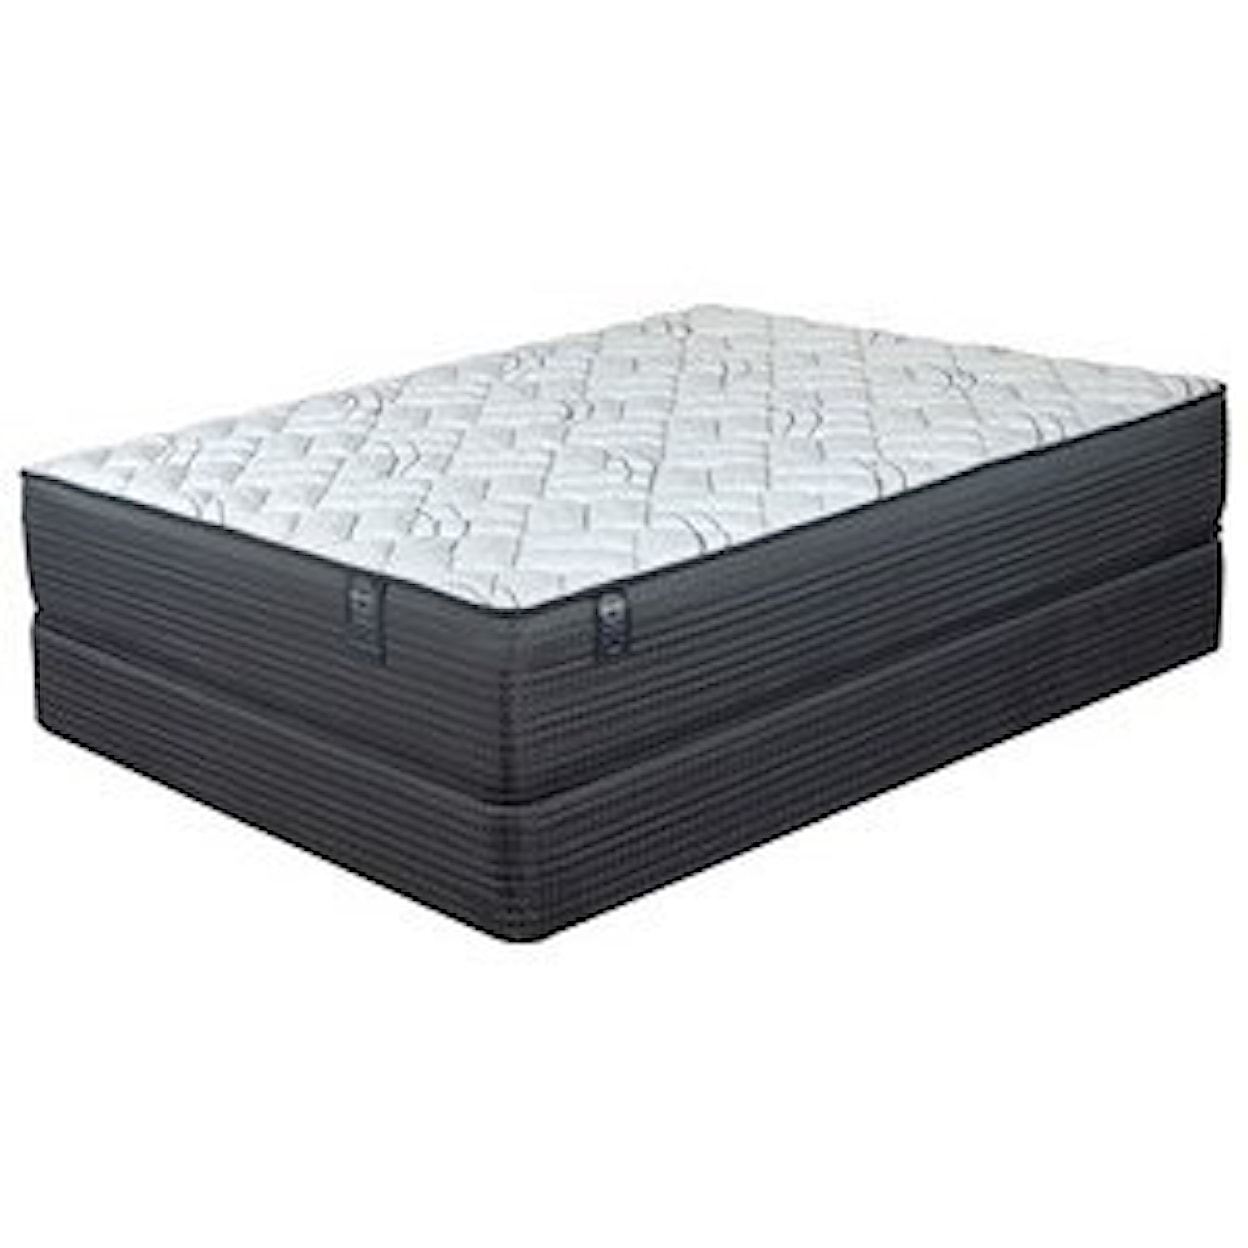 Restonic Duvall Firm Twin 14" Firm Two Sided Mattress Set